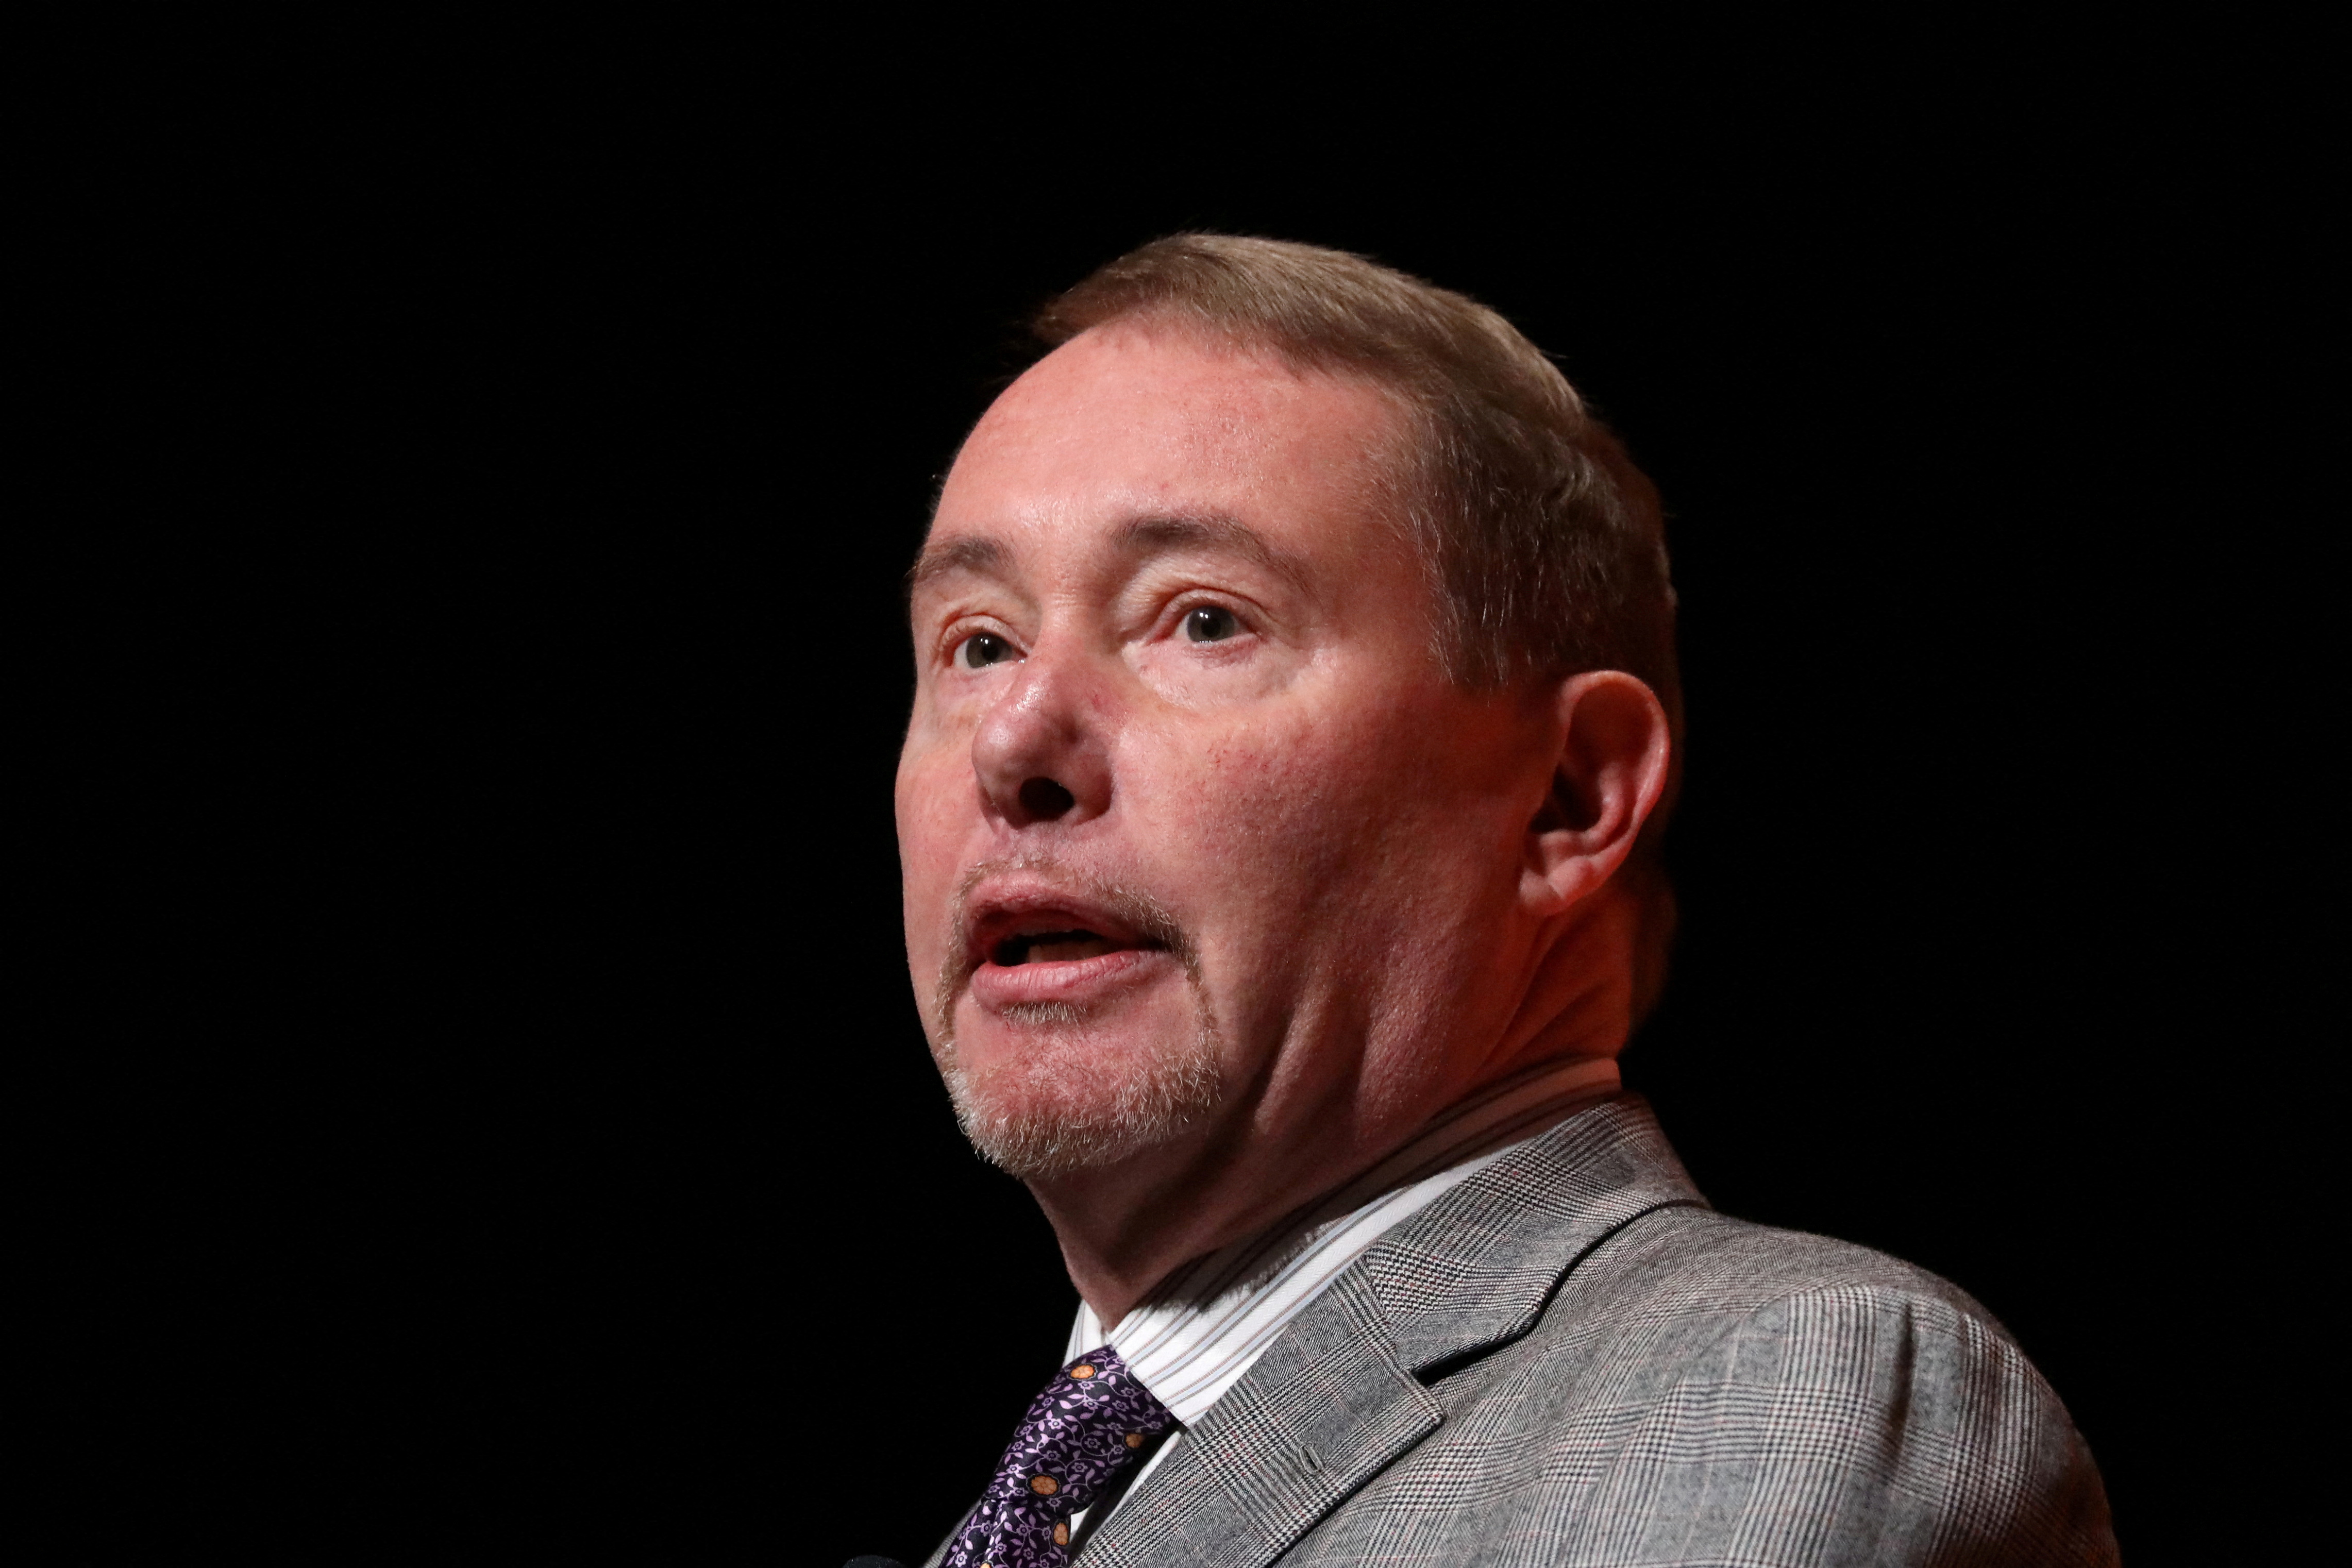 Jeffrey Gundlach, CEO of DoubleLine Capital LP, presents during the 2019 Sohn Investment Conference in New York